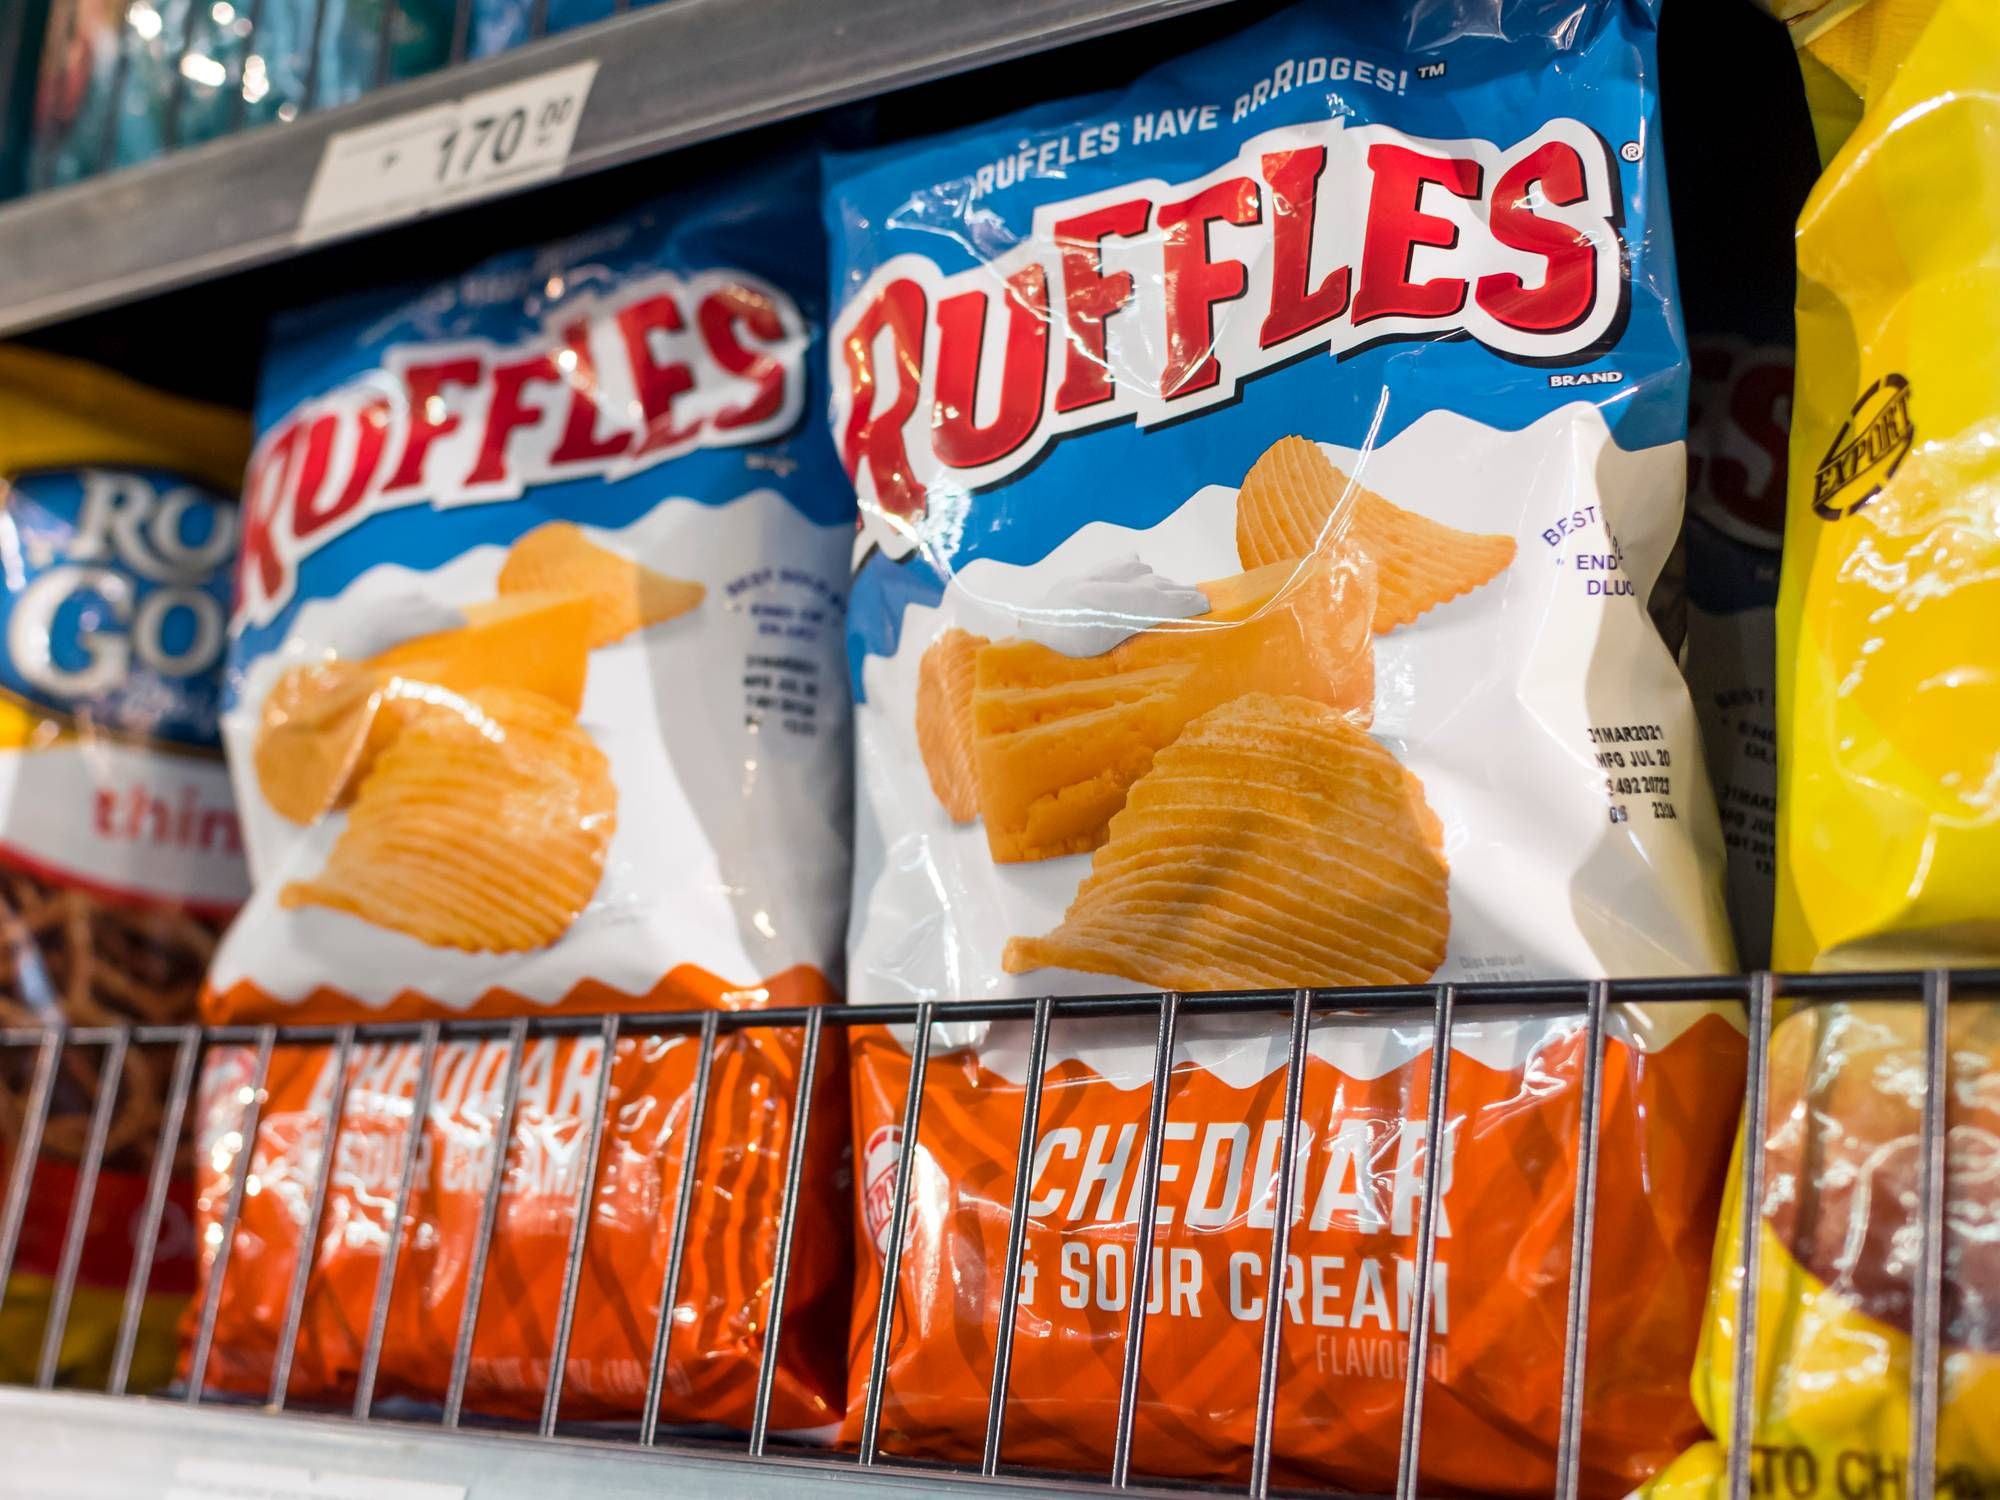 Frito-lays cheddar & sour cream chips regarding misleading labeling class action lawsuit 